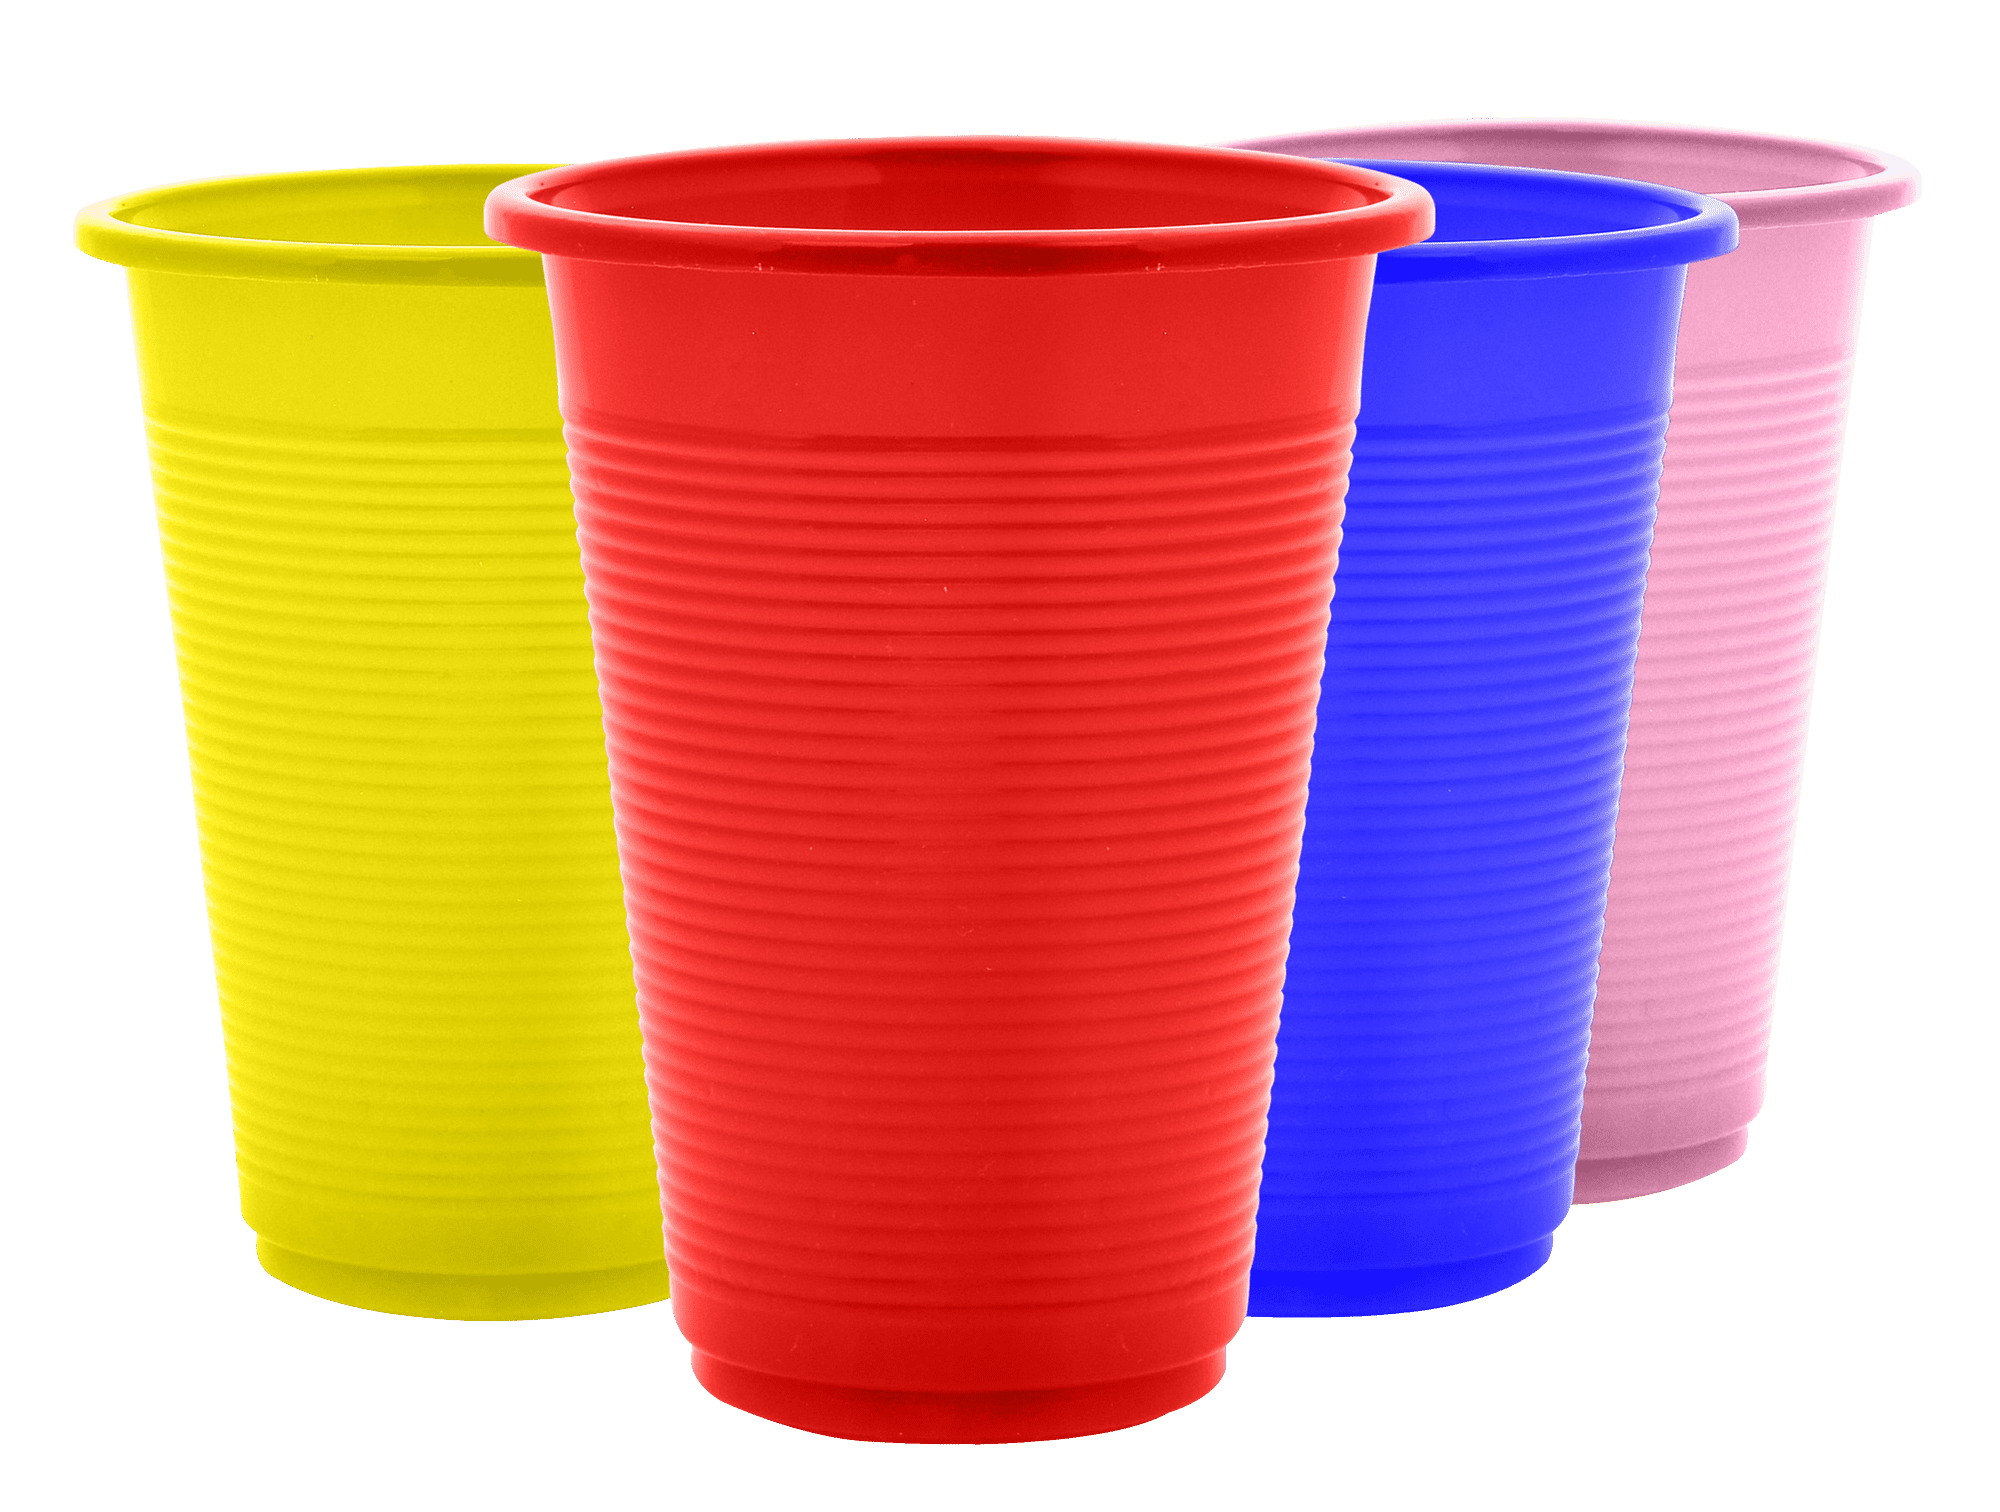 Download Plastic Cups PNG Image for Free